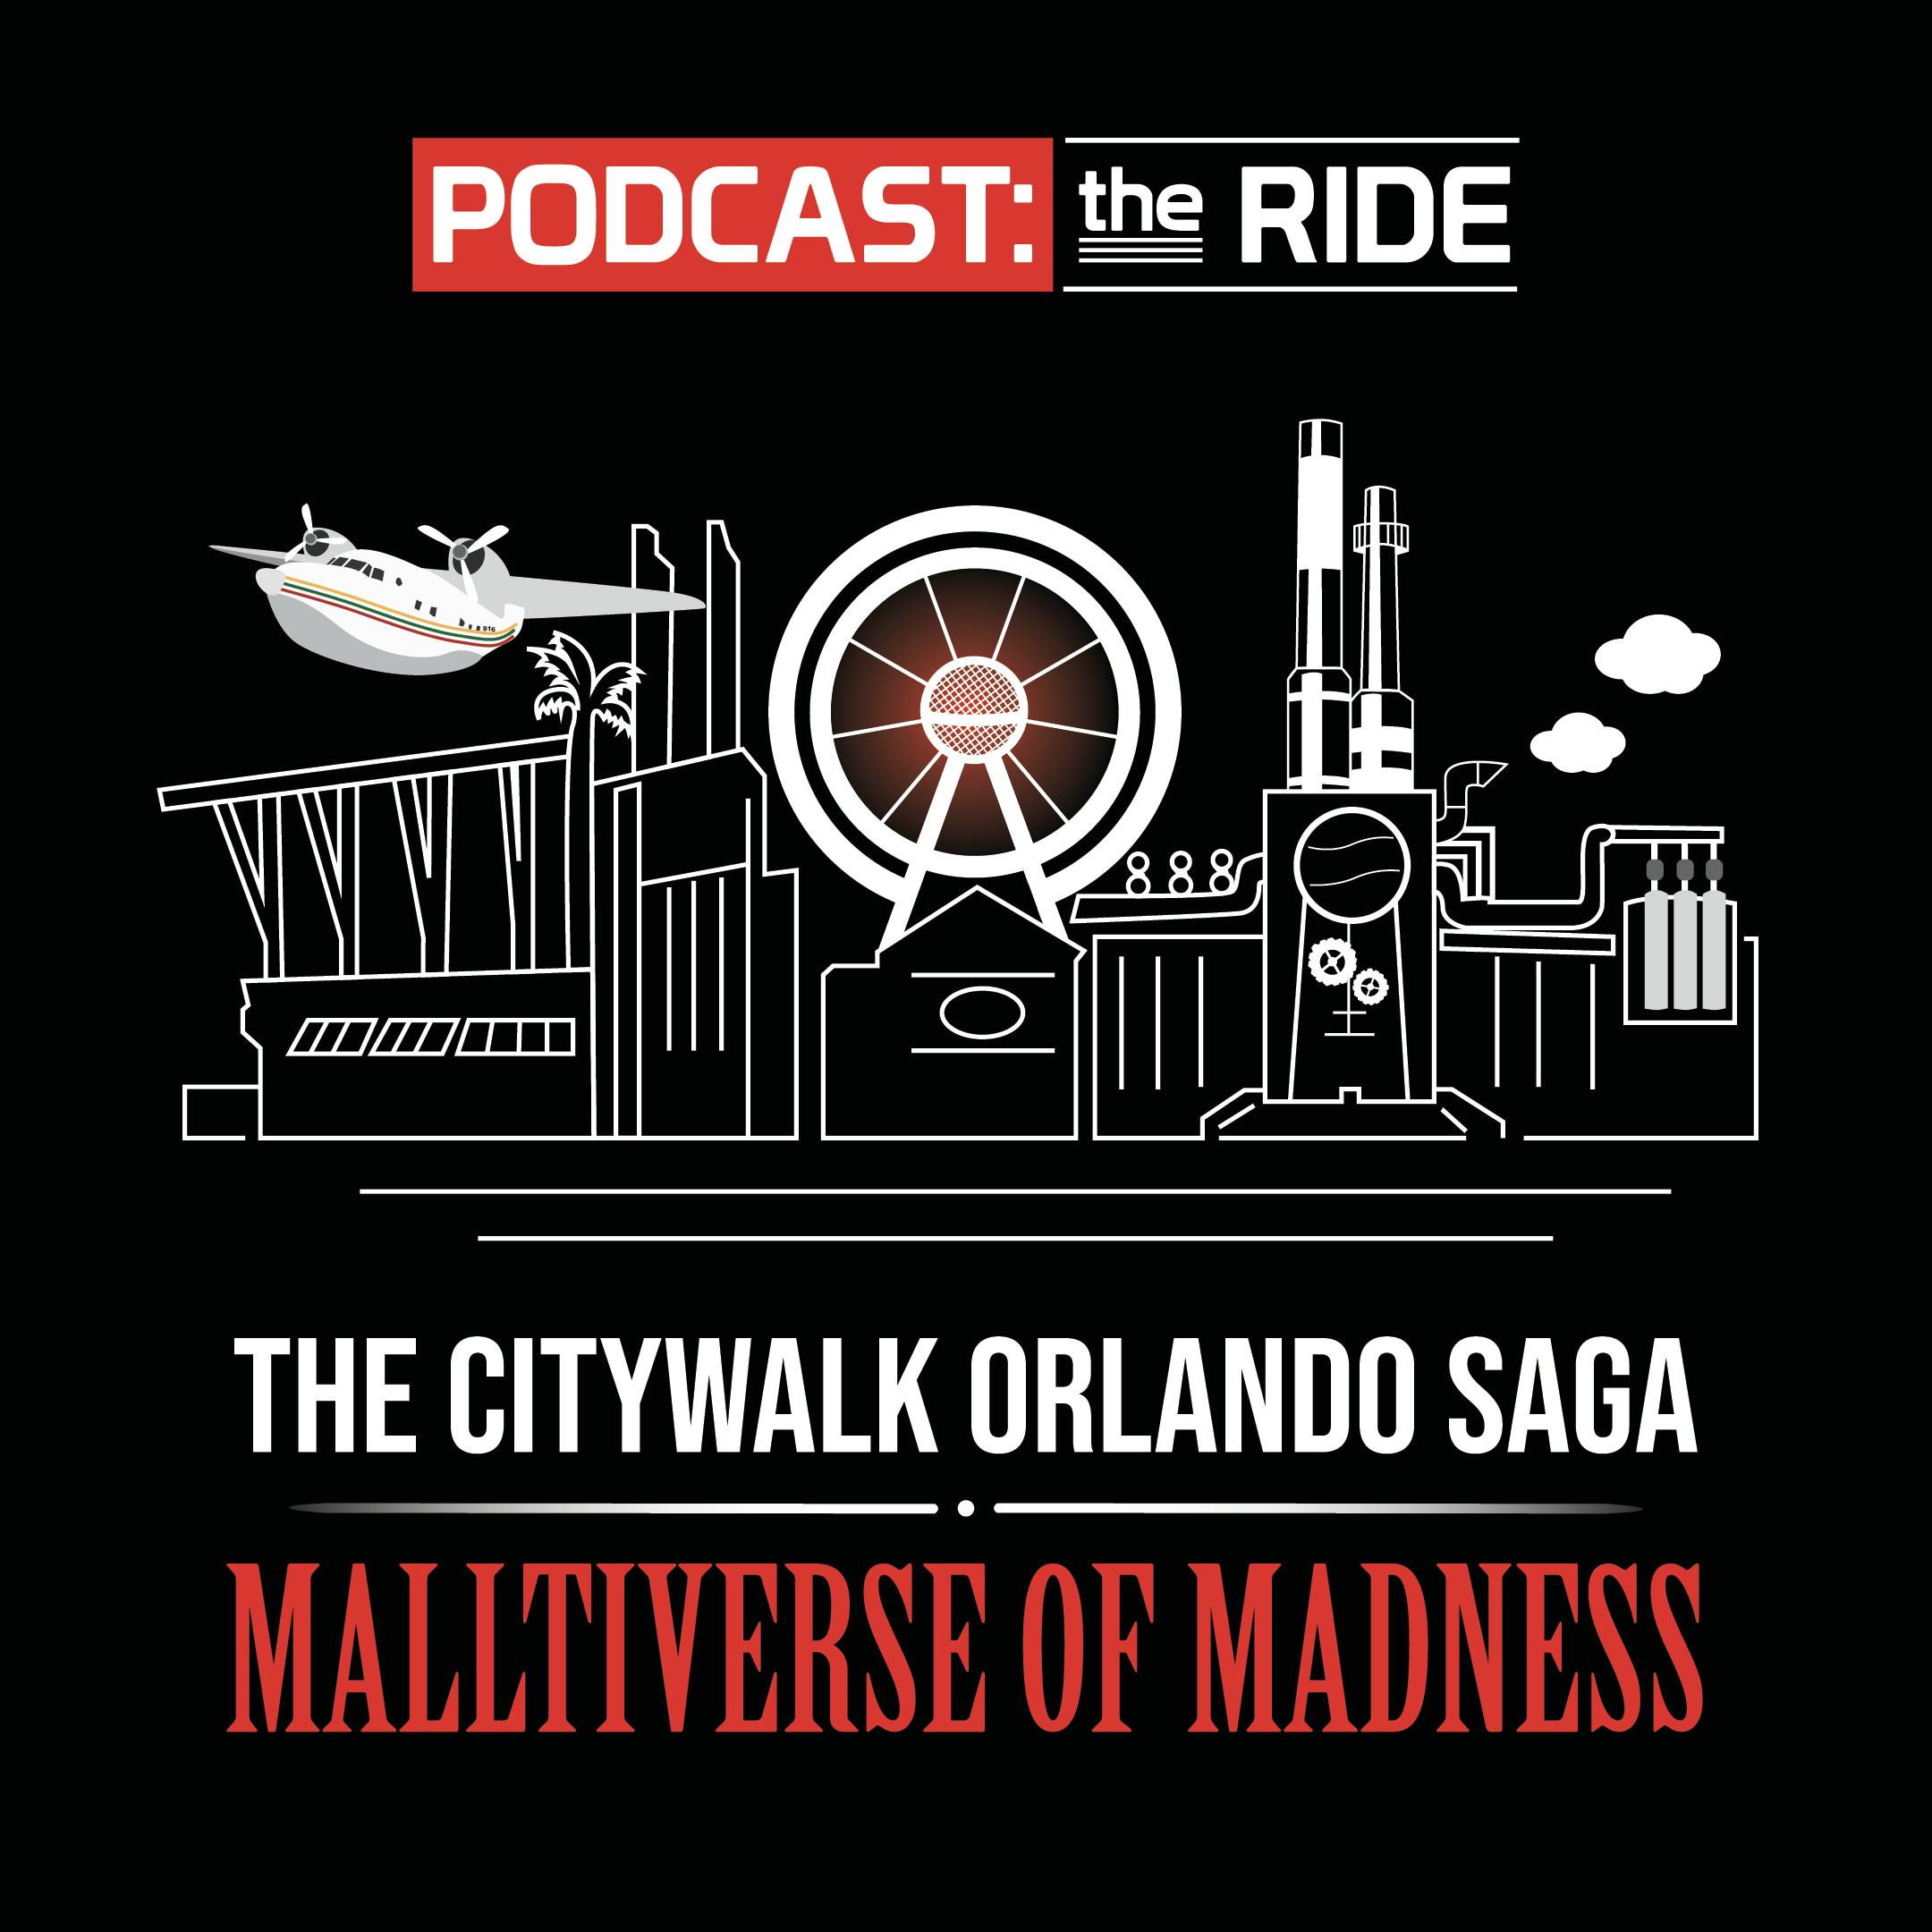 The CityWalk Orlando Saga: Malltiverse of Madness 3 - 2 with Jayne Claire